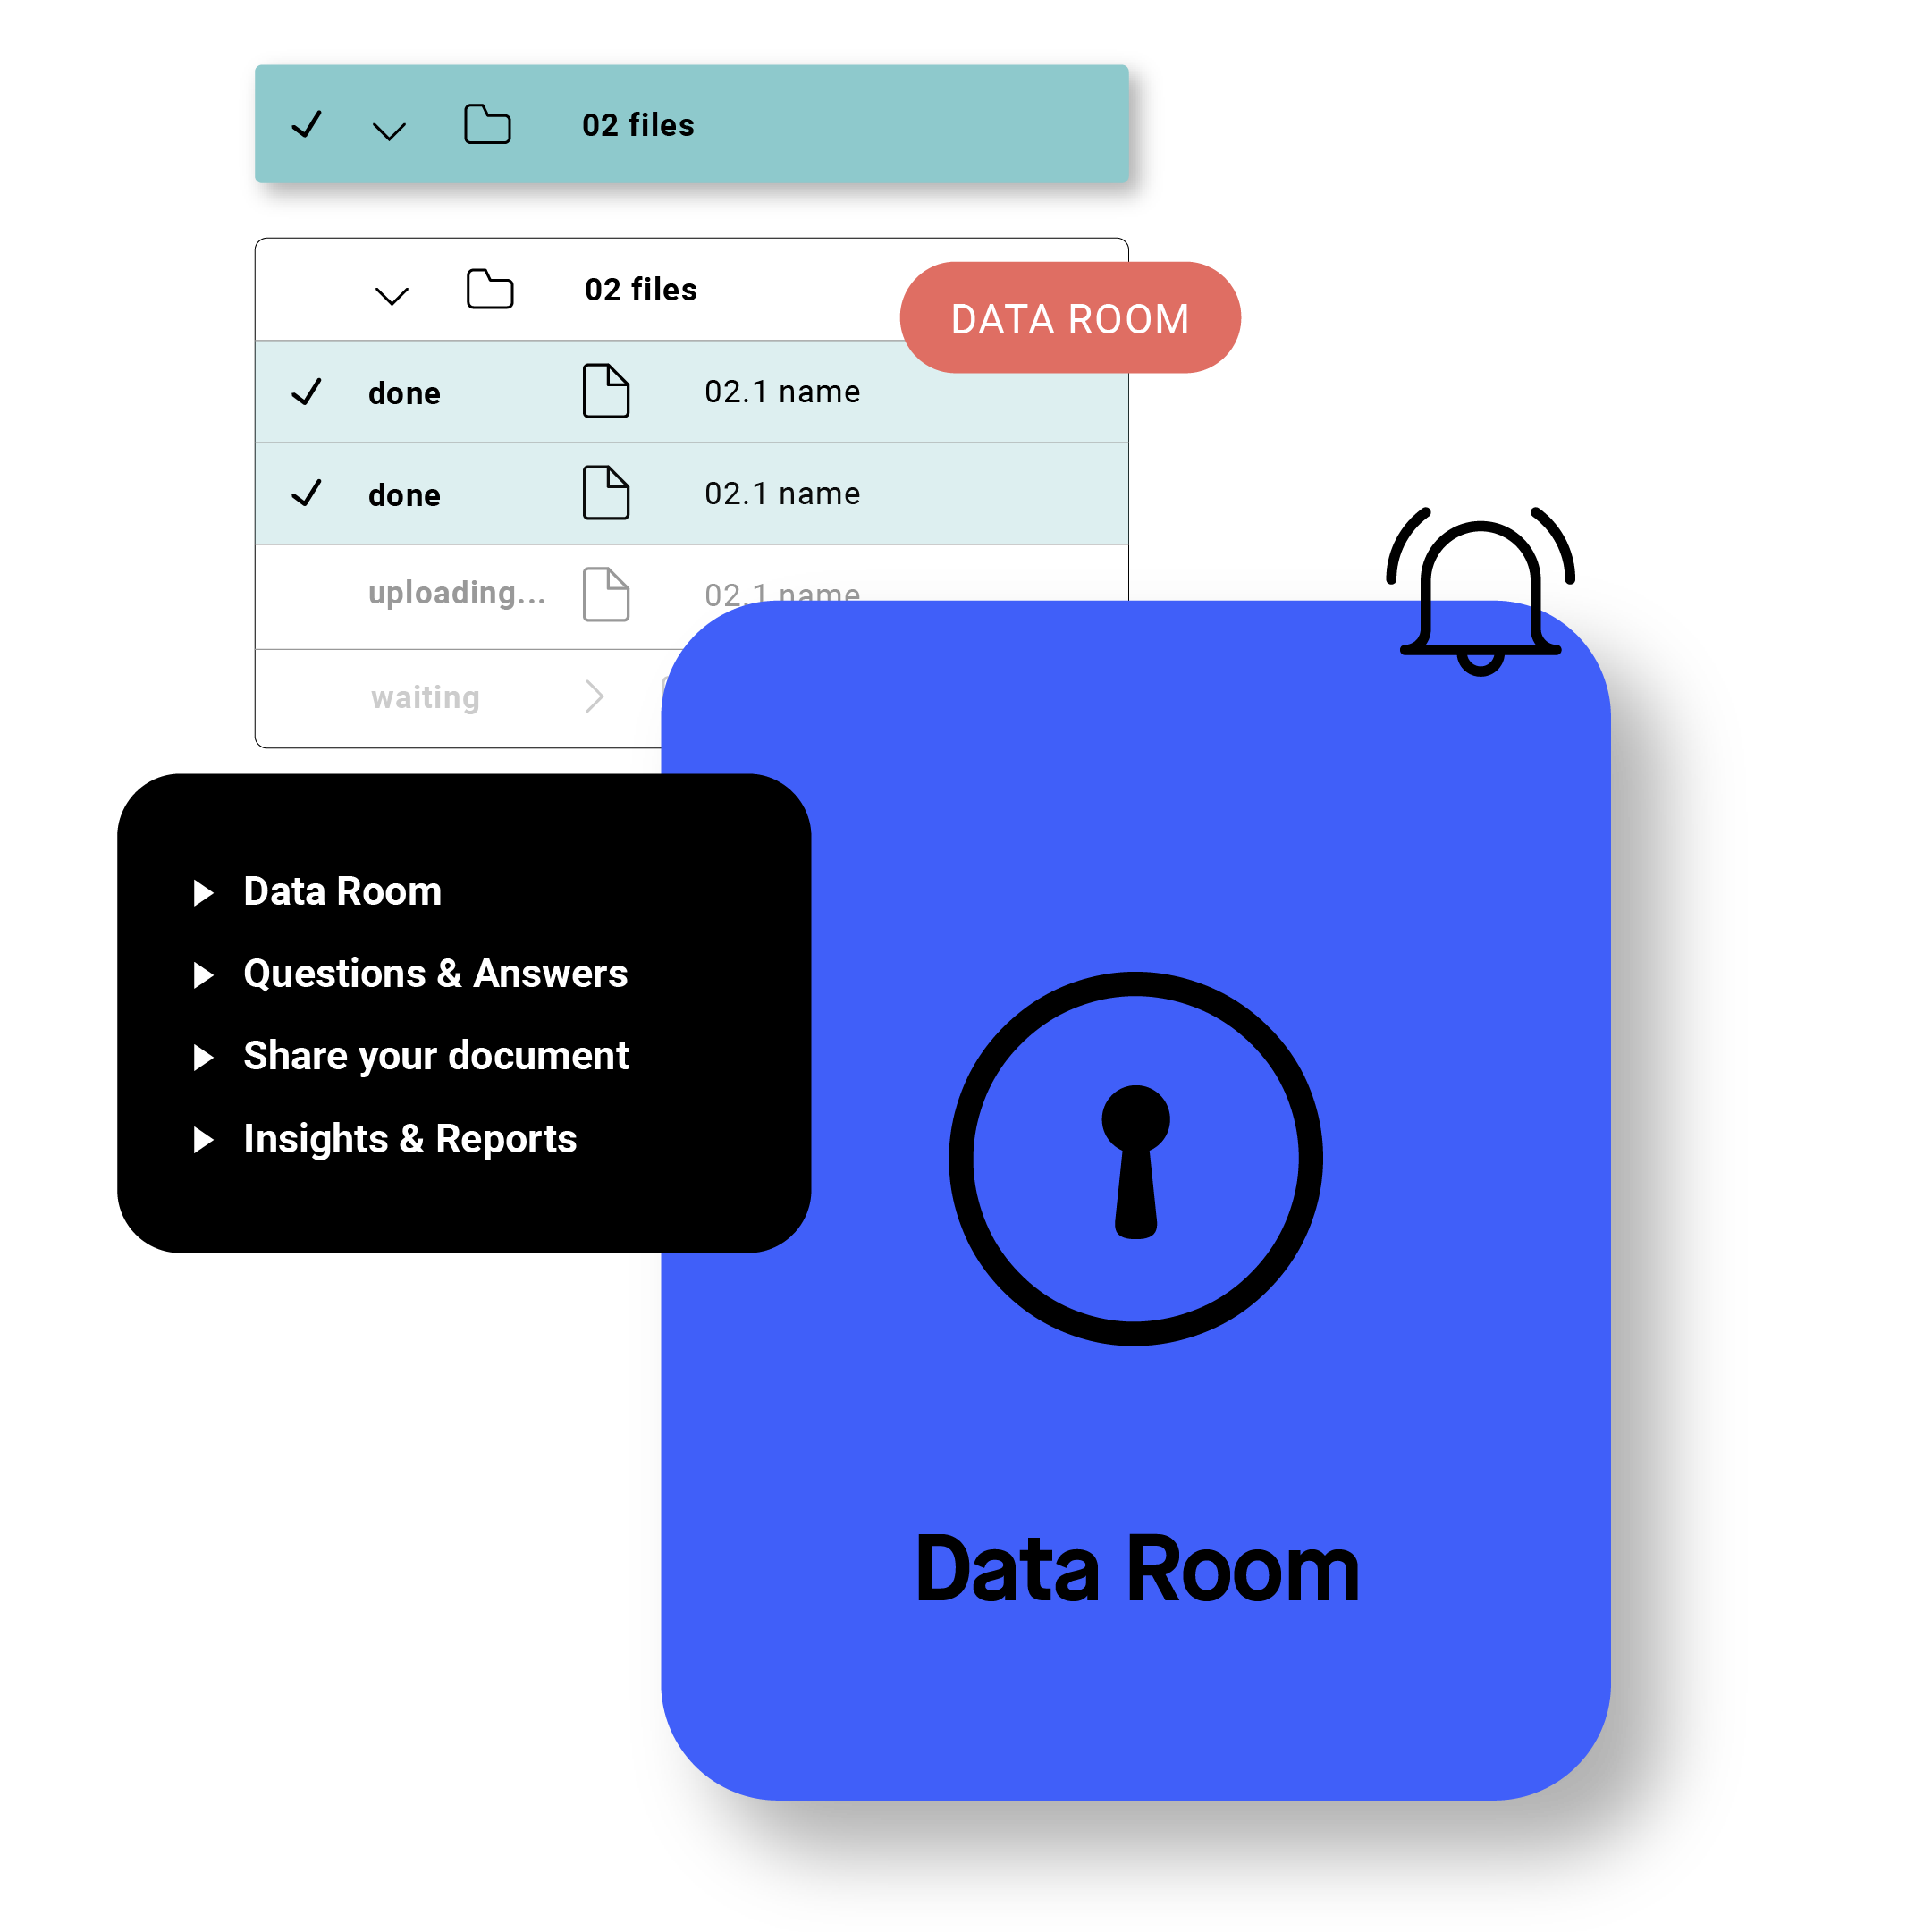 How to set up a data room?